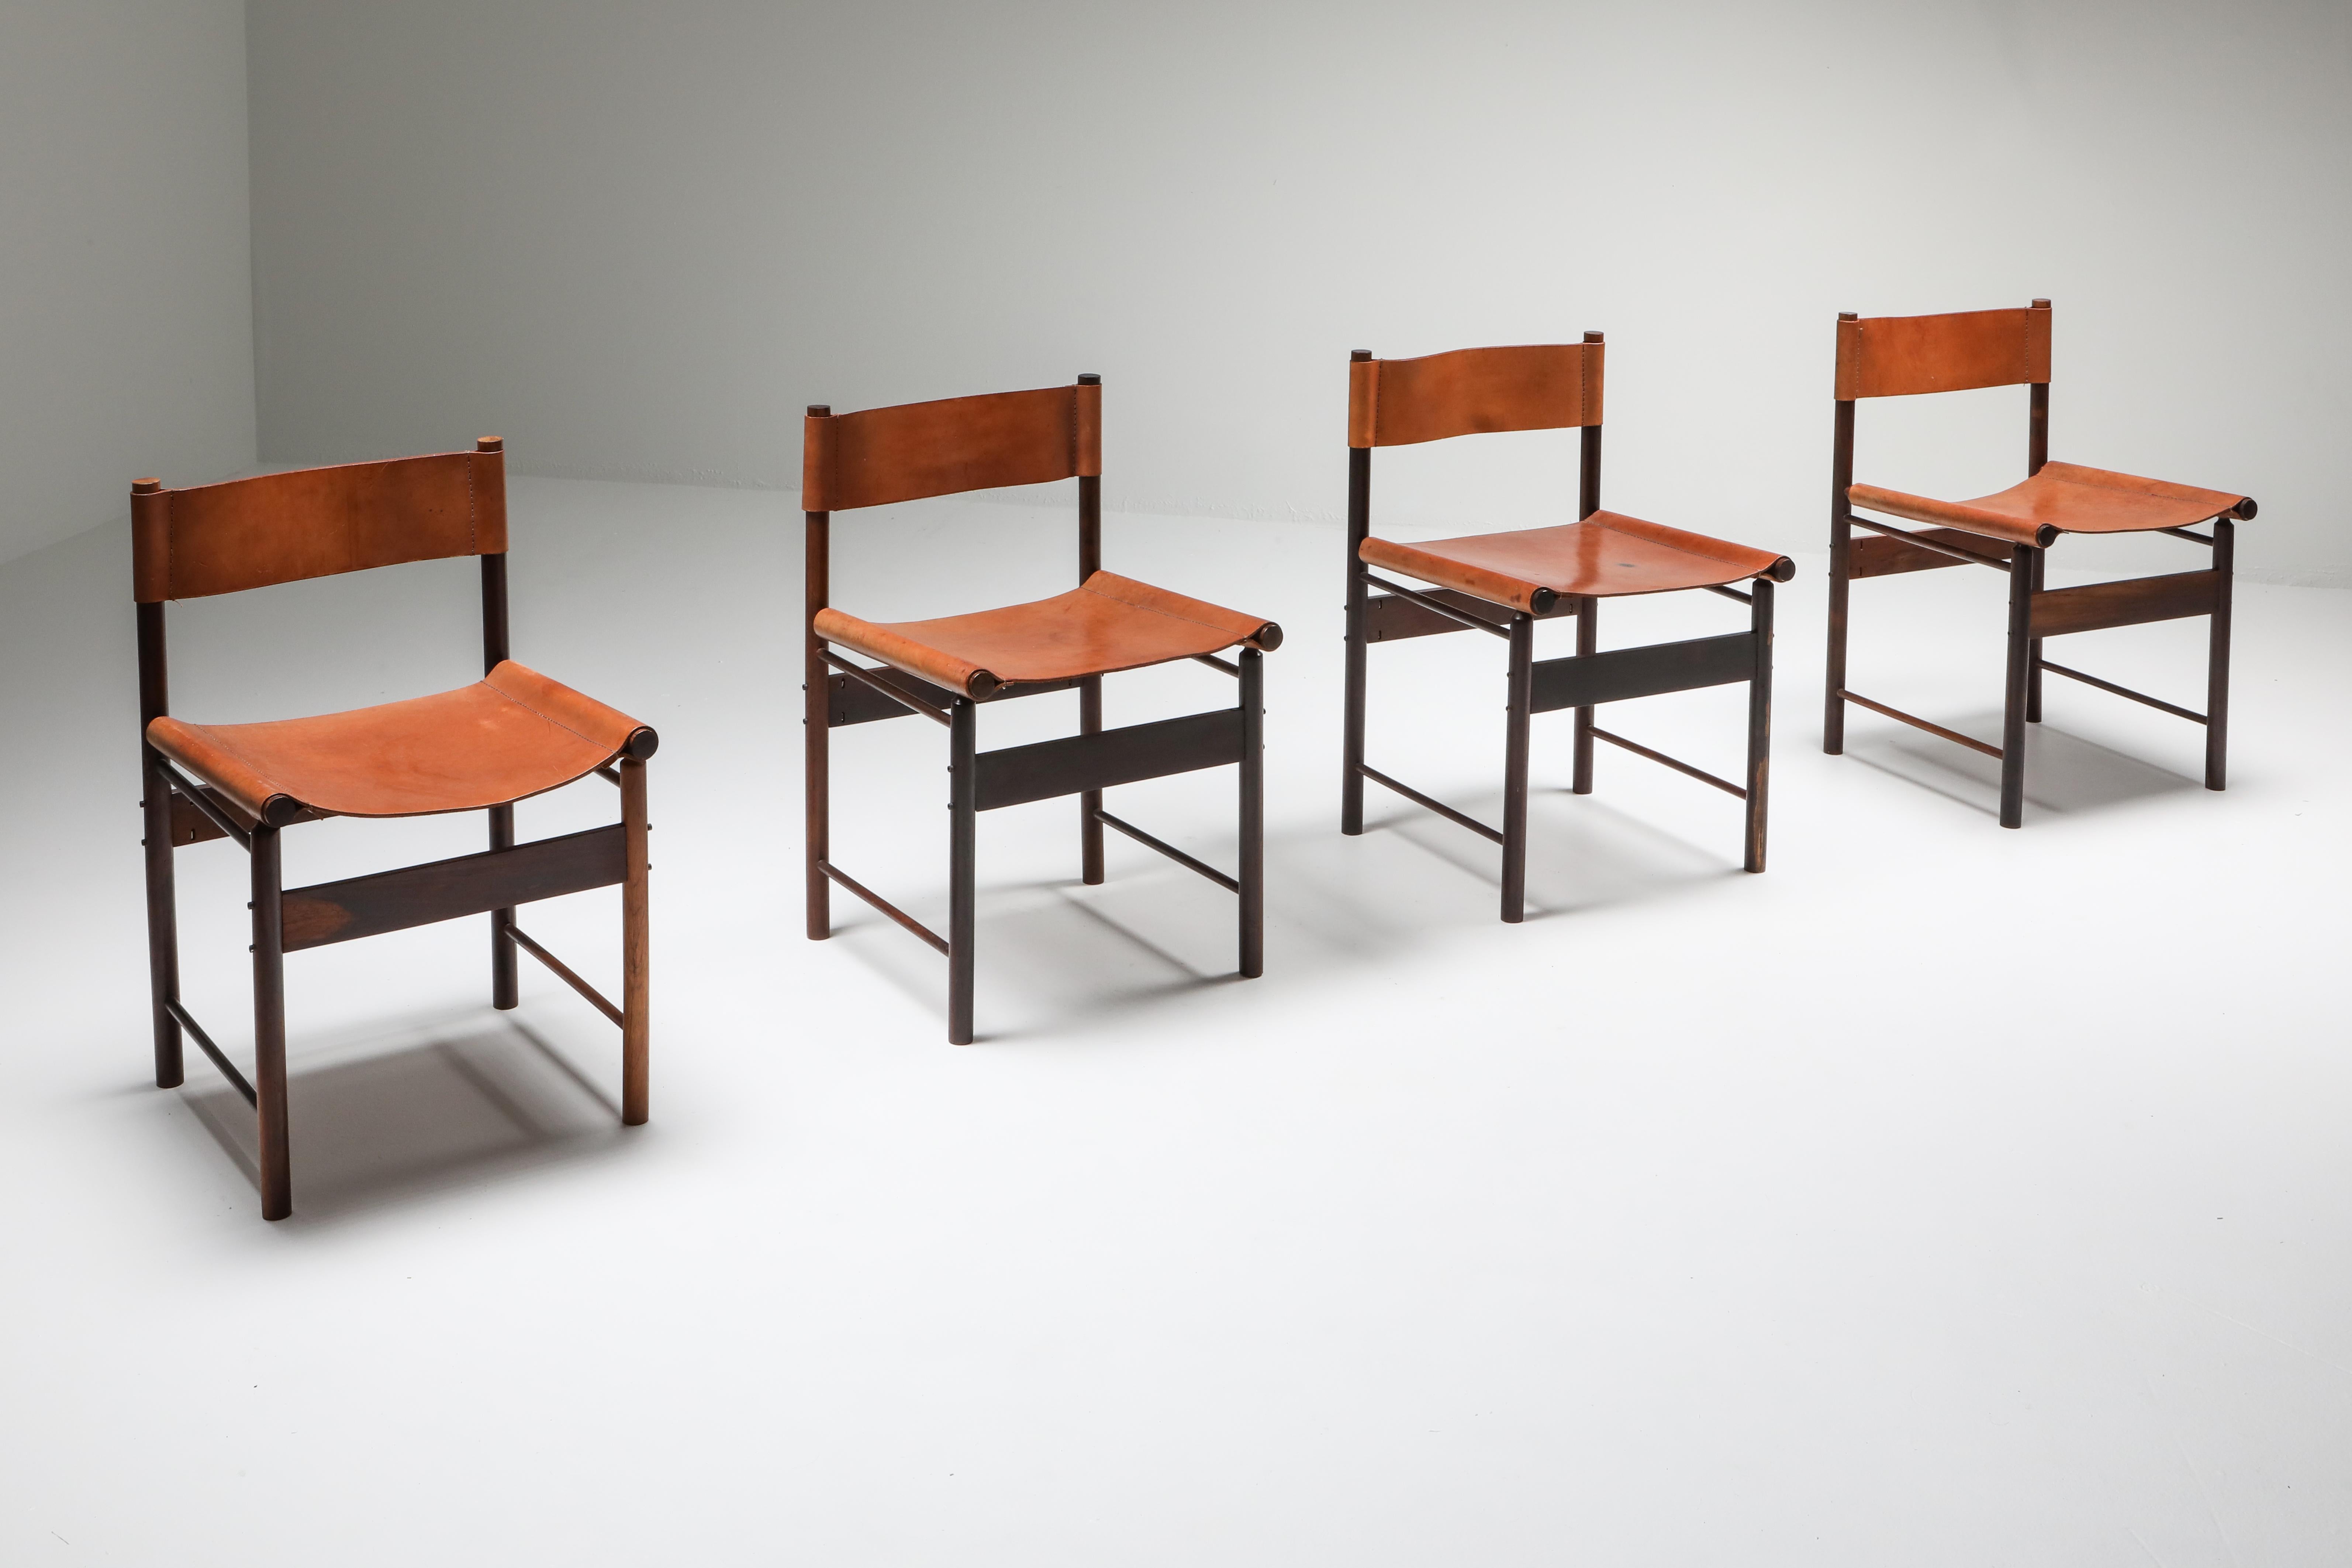 Brazilian modern, Jorge Zalszupin (°Warsaw, 1922), rosewood and leather chairs, L'atelier Brazil, circa 1955.

Brazilian wood / jacaranda and leather.

These are also featured in the book about Jorge Zalszupin and Modern design in Brazil.
Very